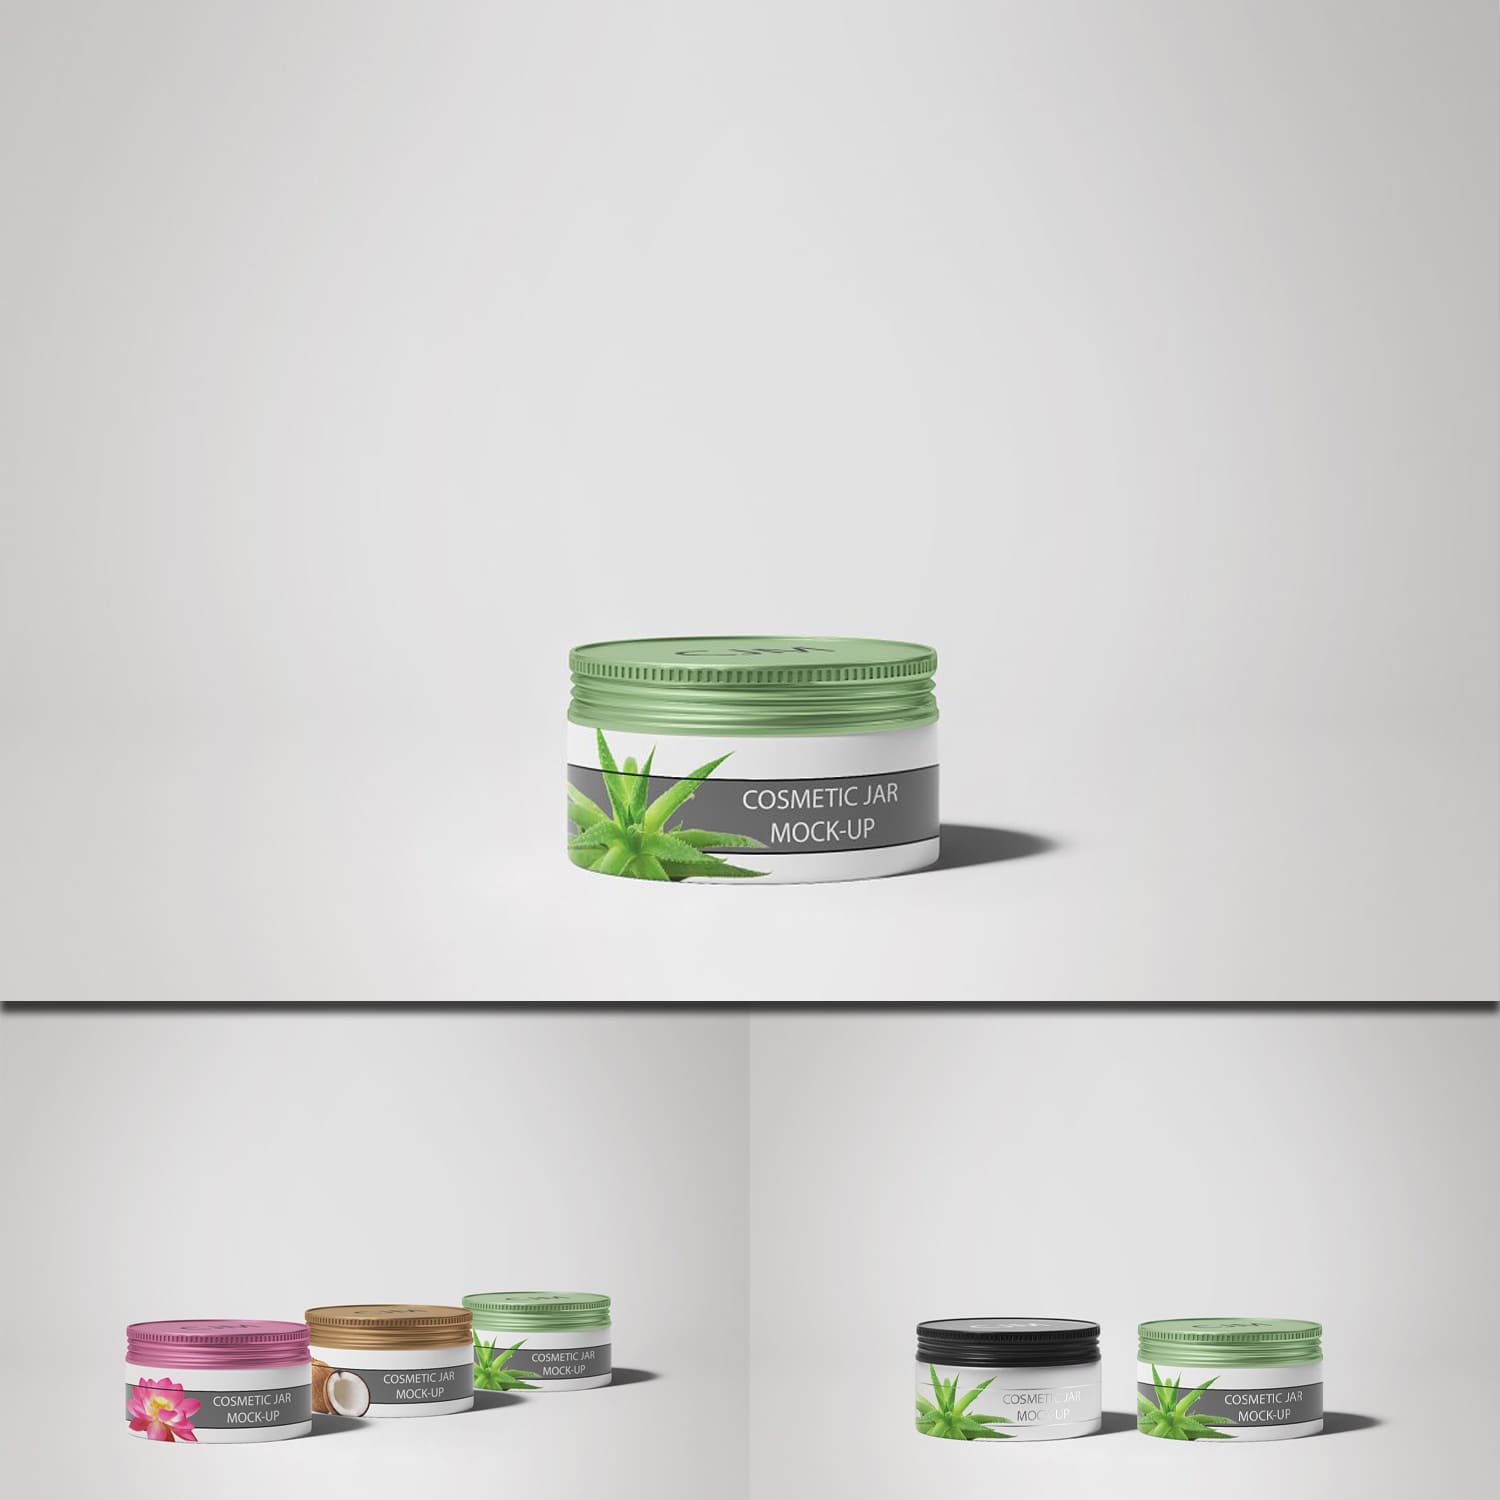 Cosmetic Jar Mock-Up cover.